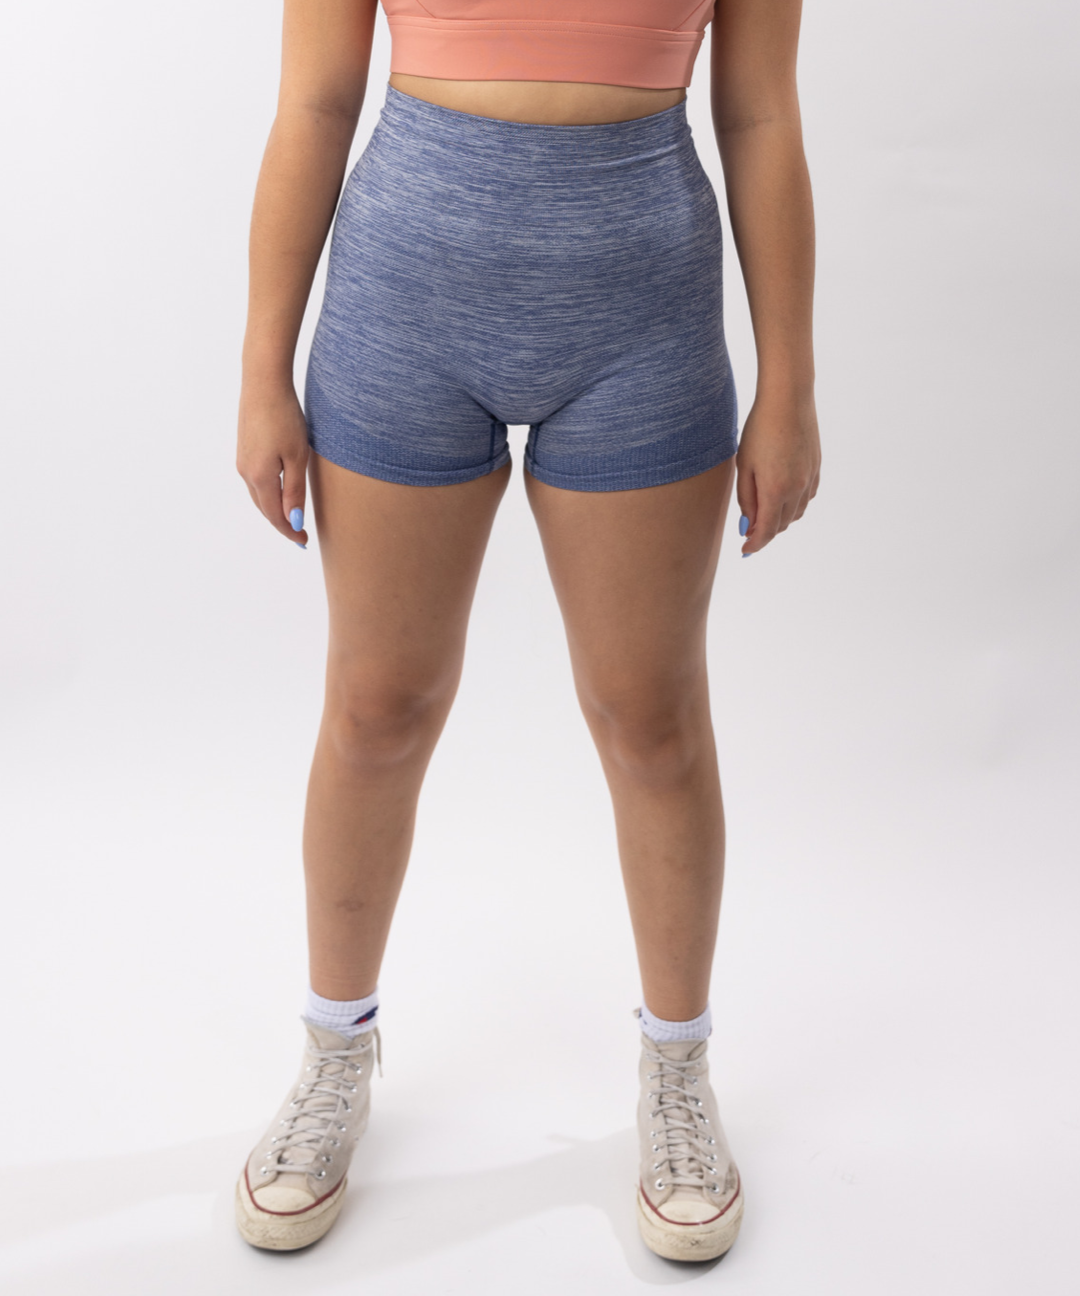  AIOIC $18.99! If you're looking for cute athletic shorts